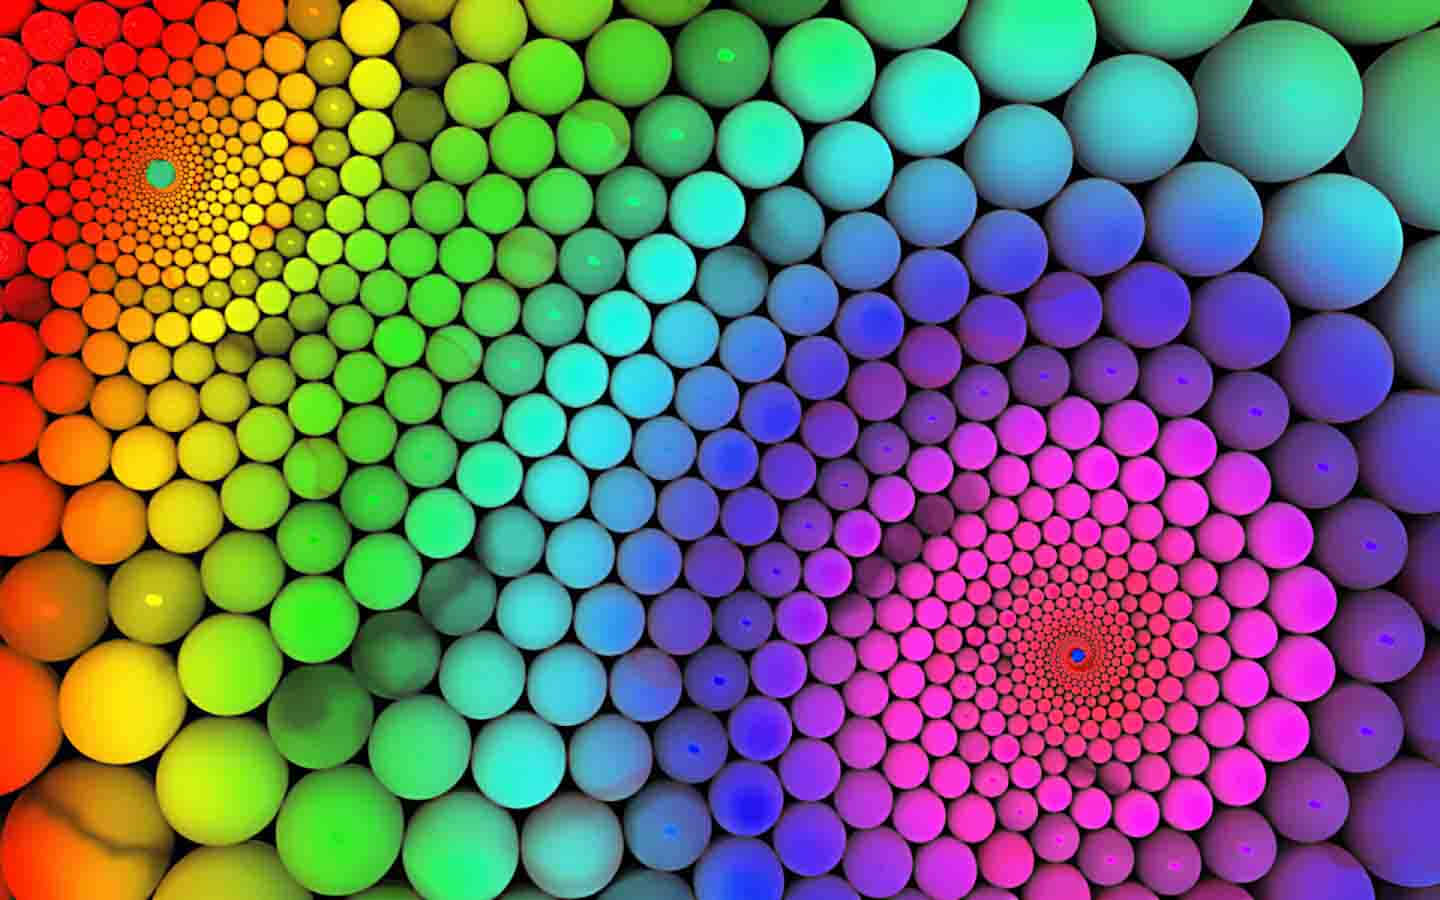 A colorful, psychedelic groovy background pattern.